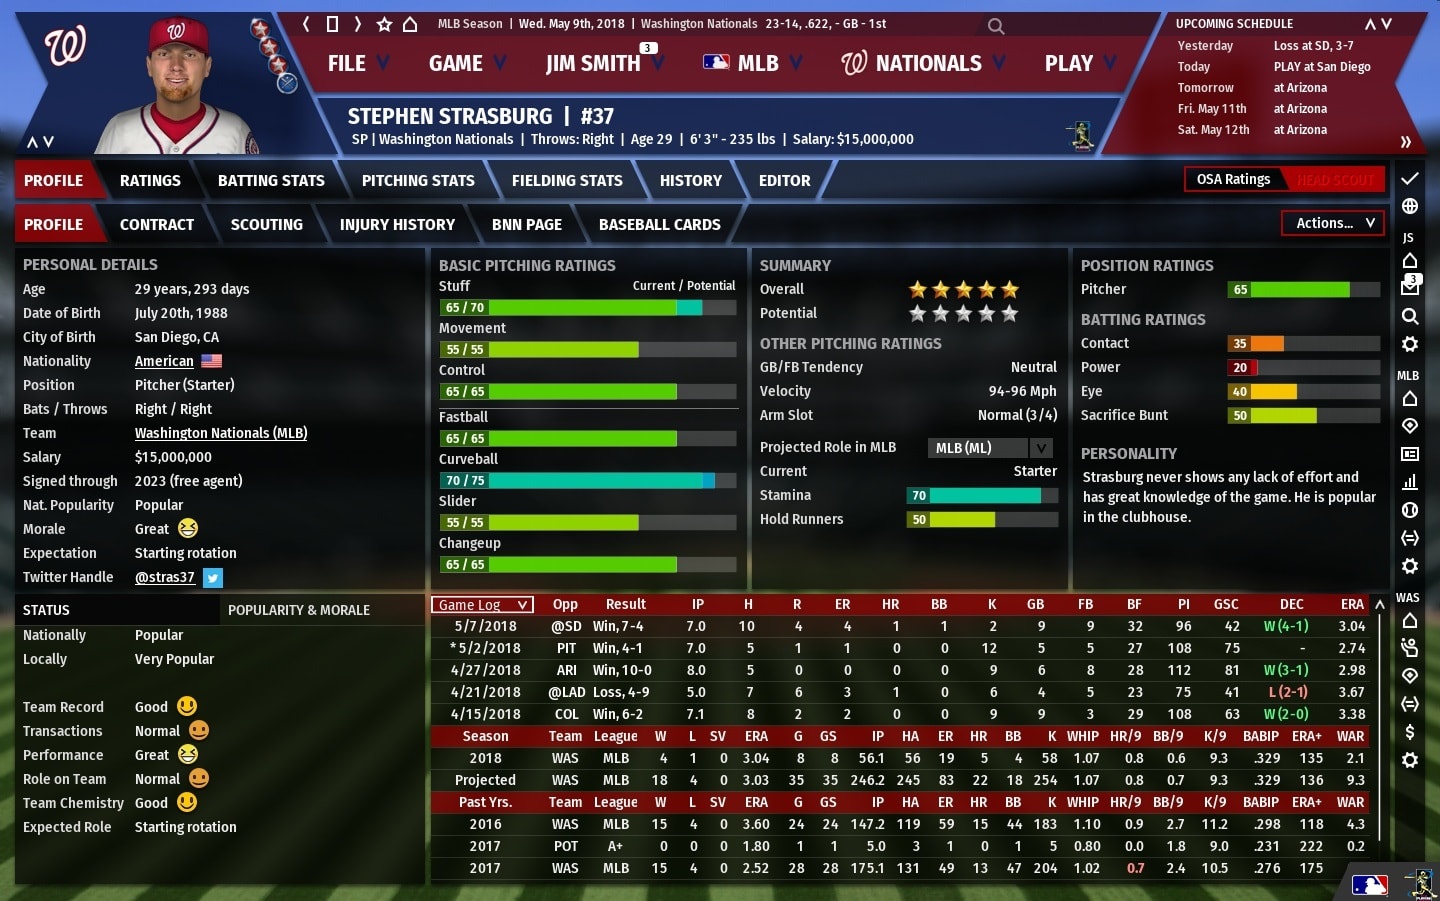 ootp baseball acquire a top player